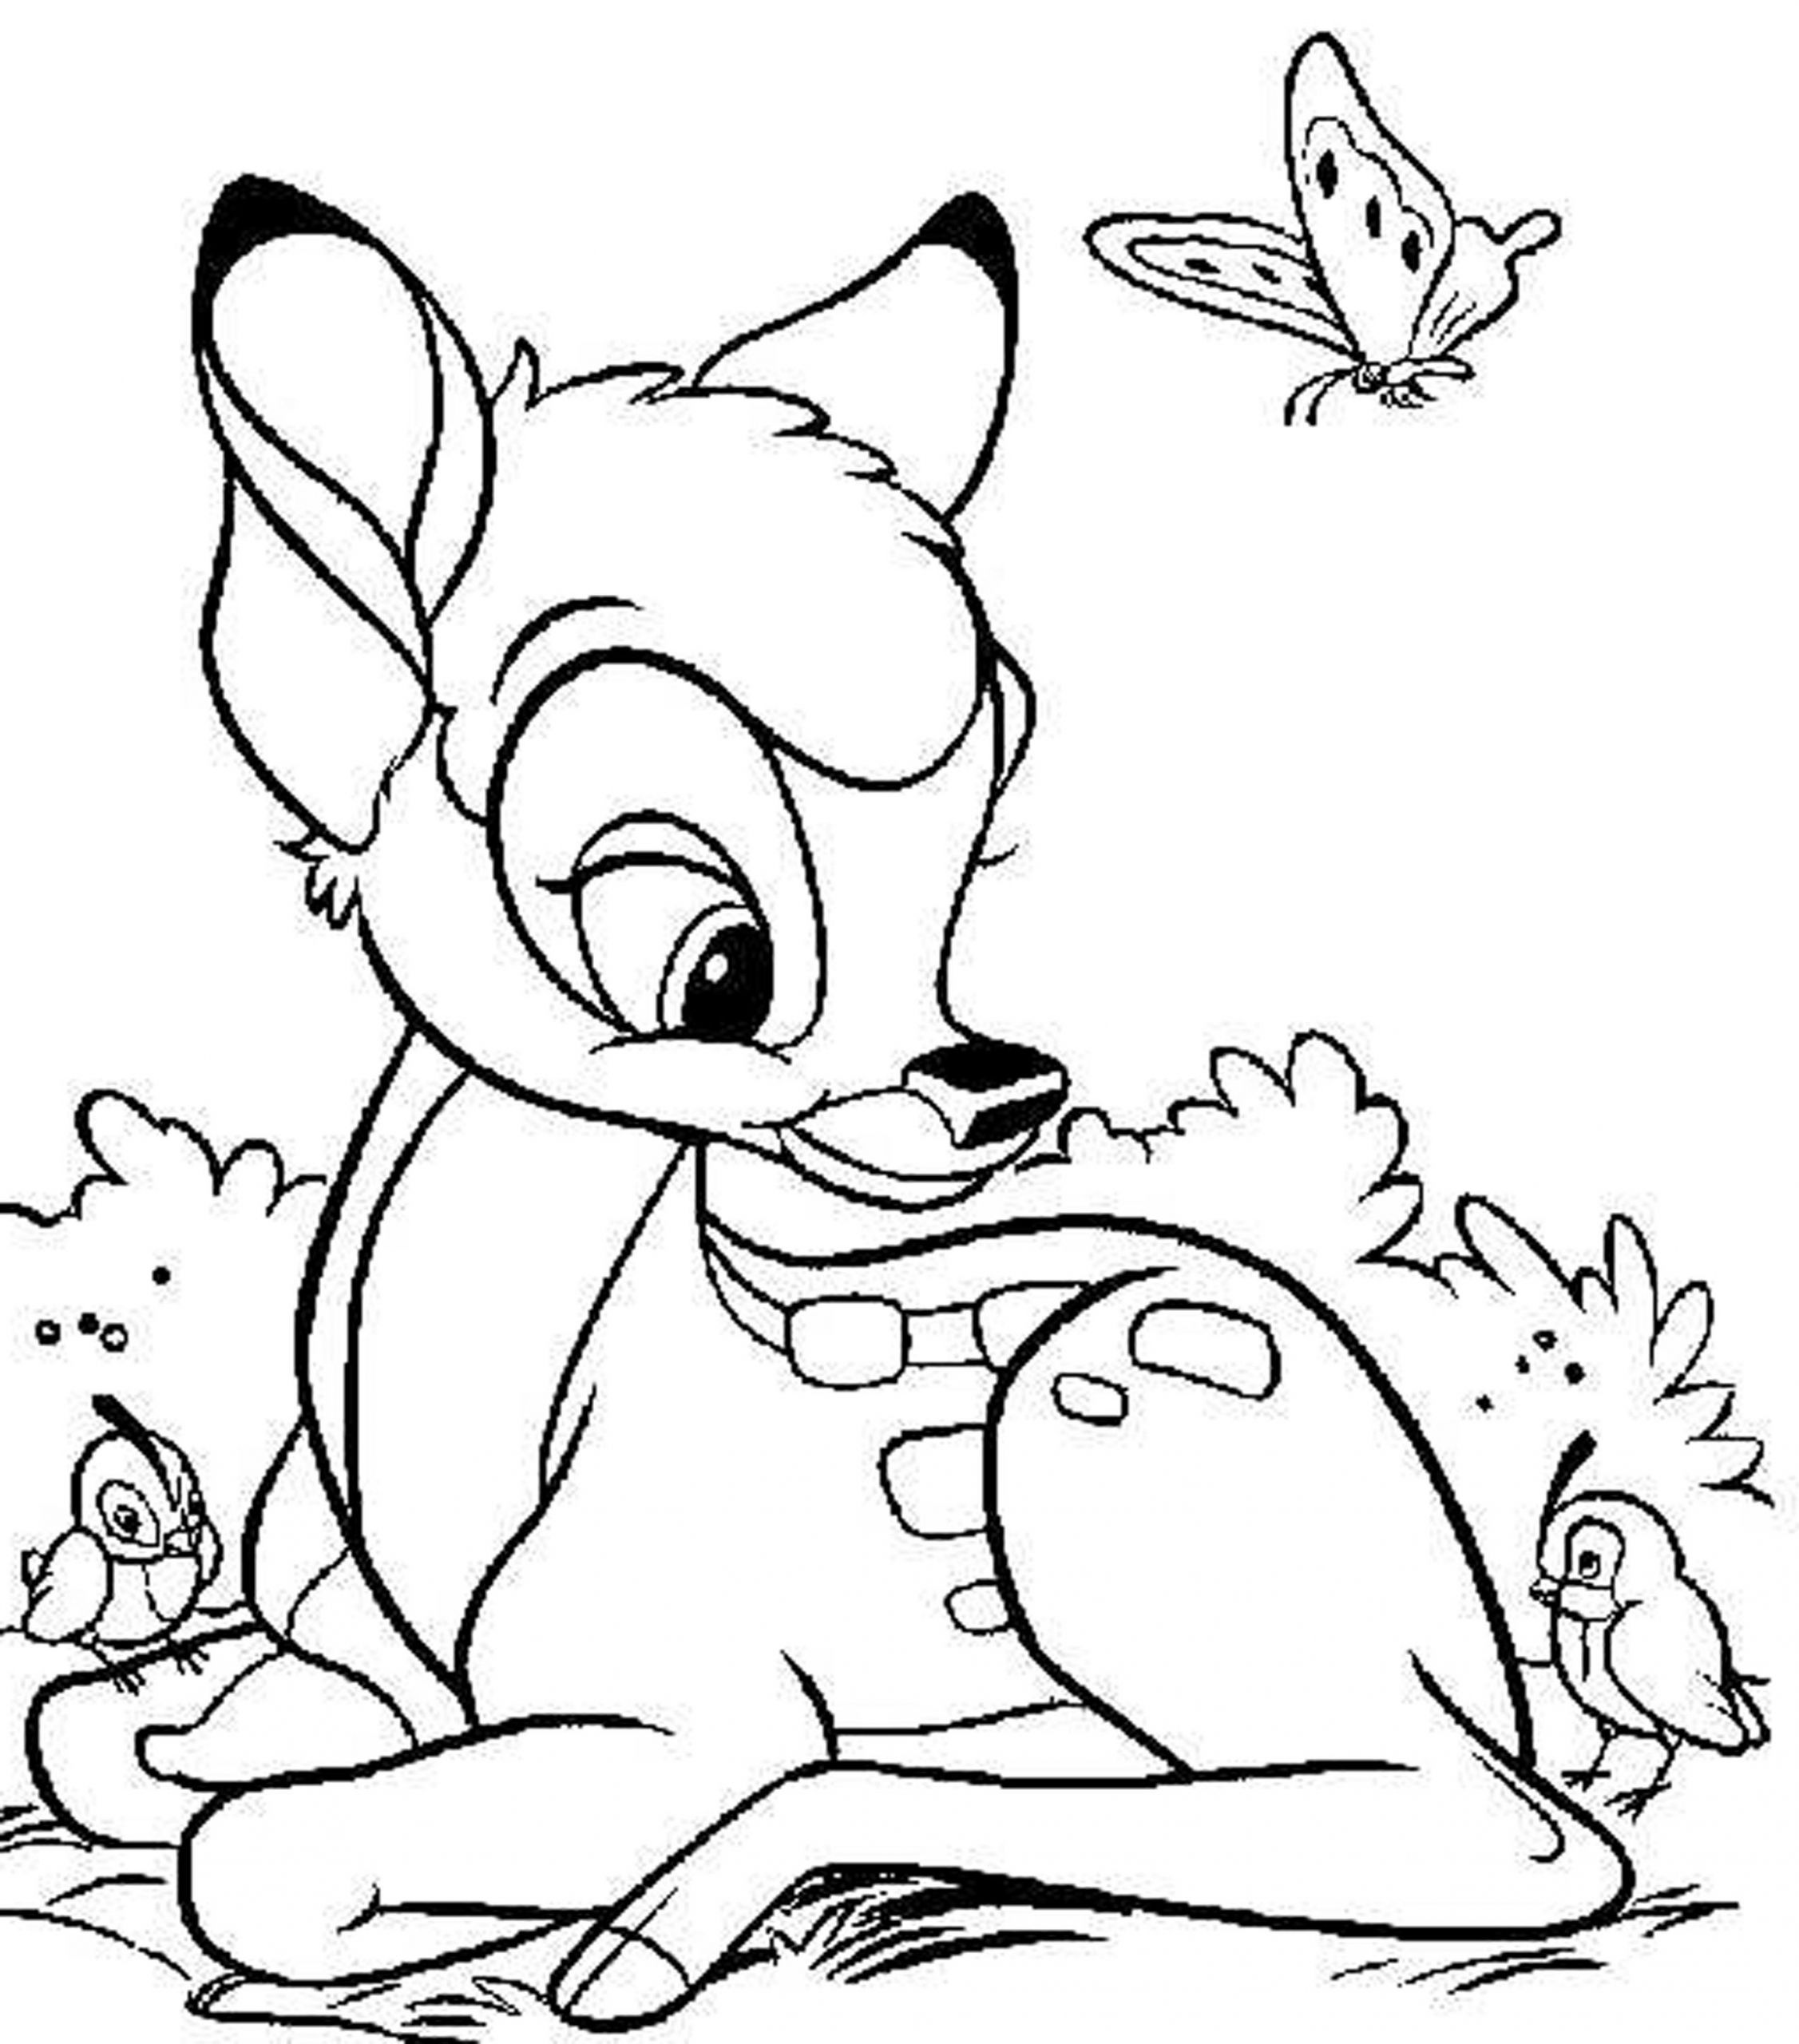 Awesome Coloring Pages For Kids
 Coloring Pages Awesome Coloring Pages For Kids Disney